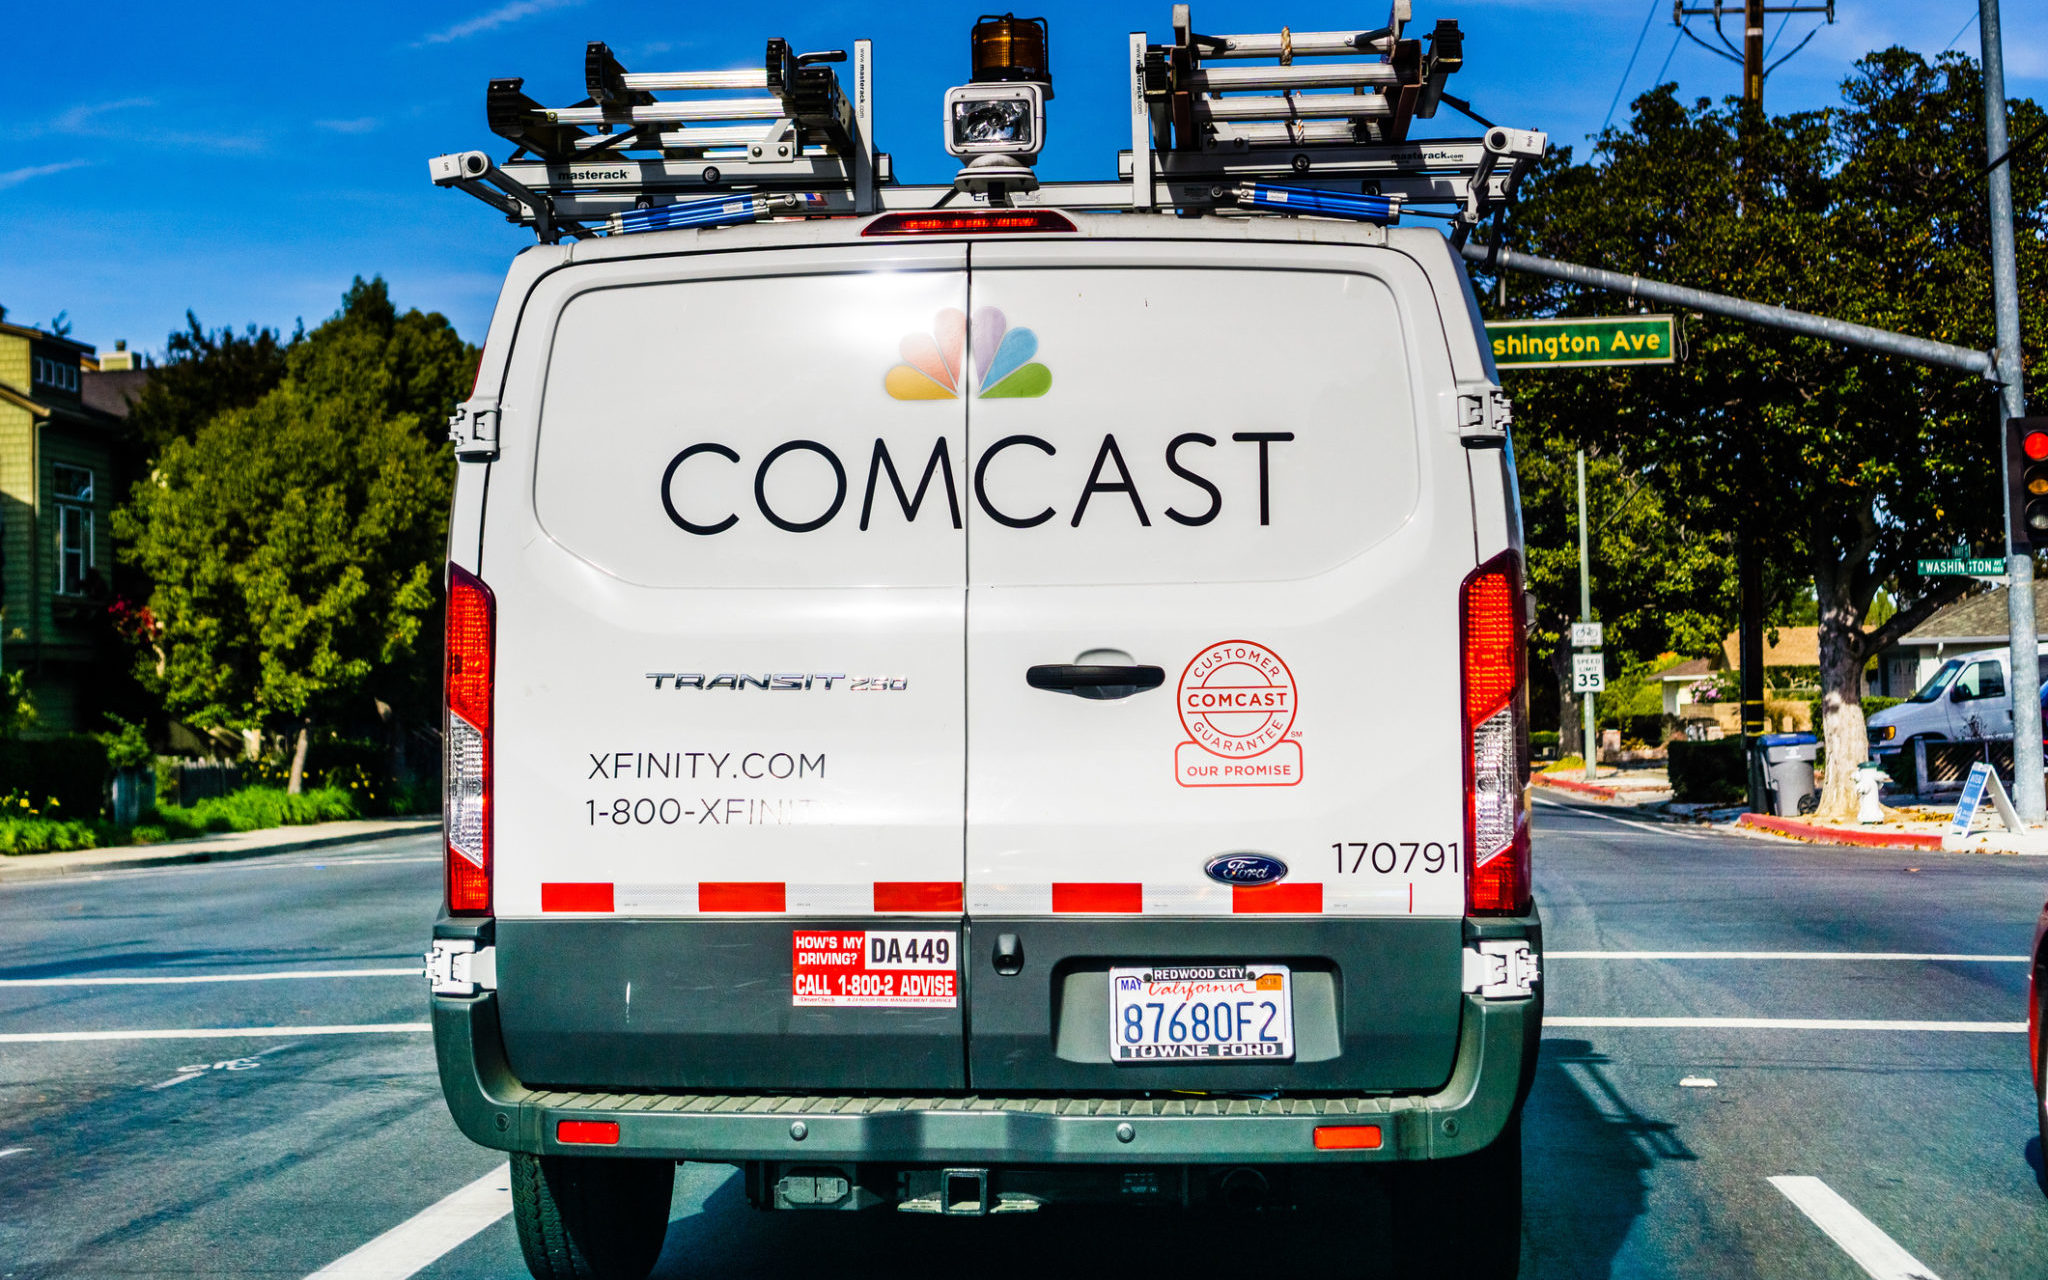 Comcast, Spectrum, Cox, & More Make “Great Strides” Toward the Launch of 10G Internet